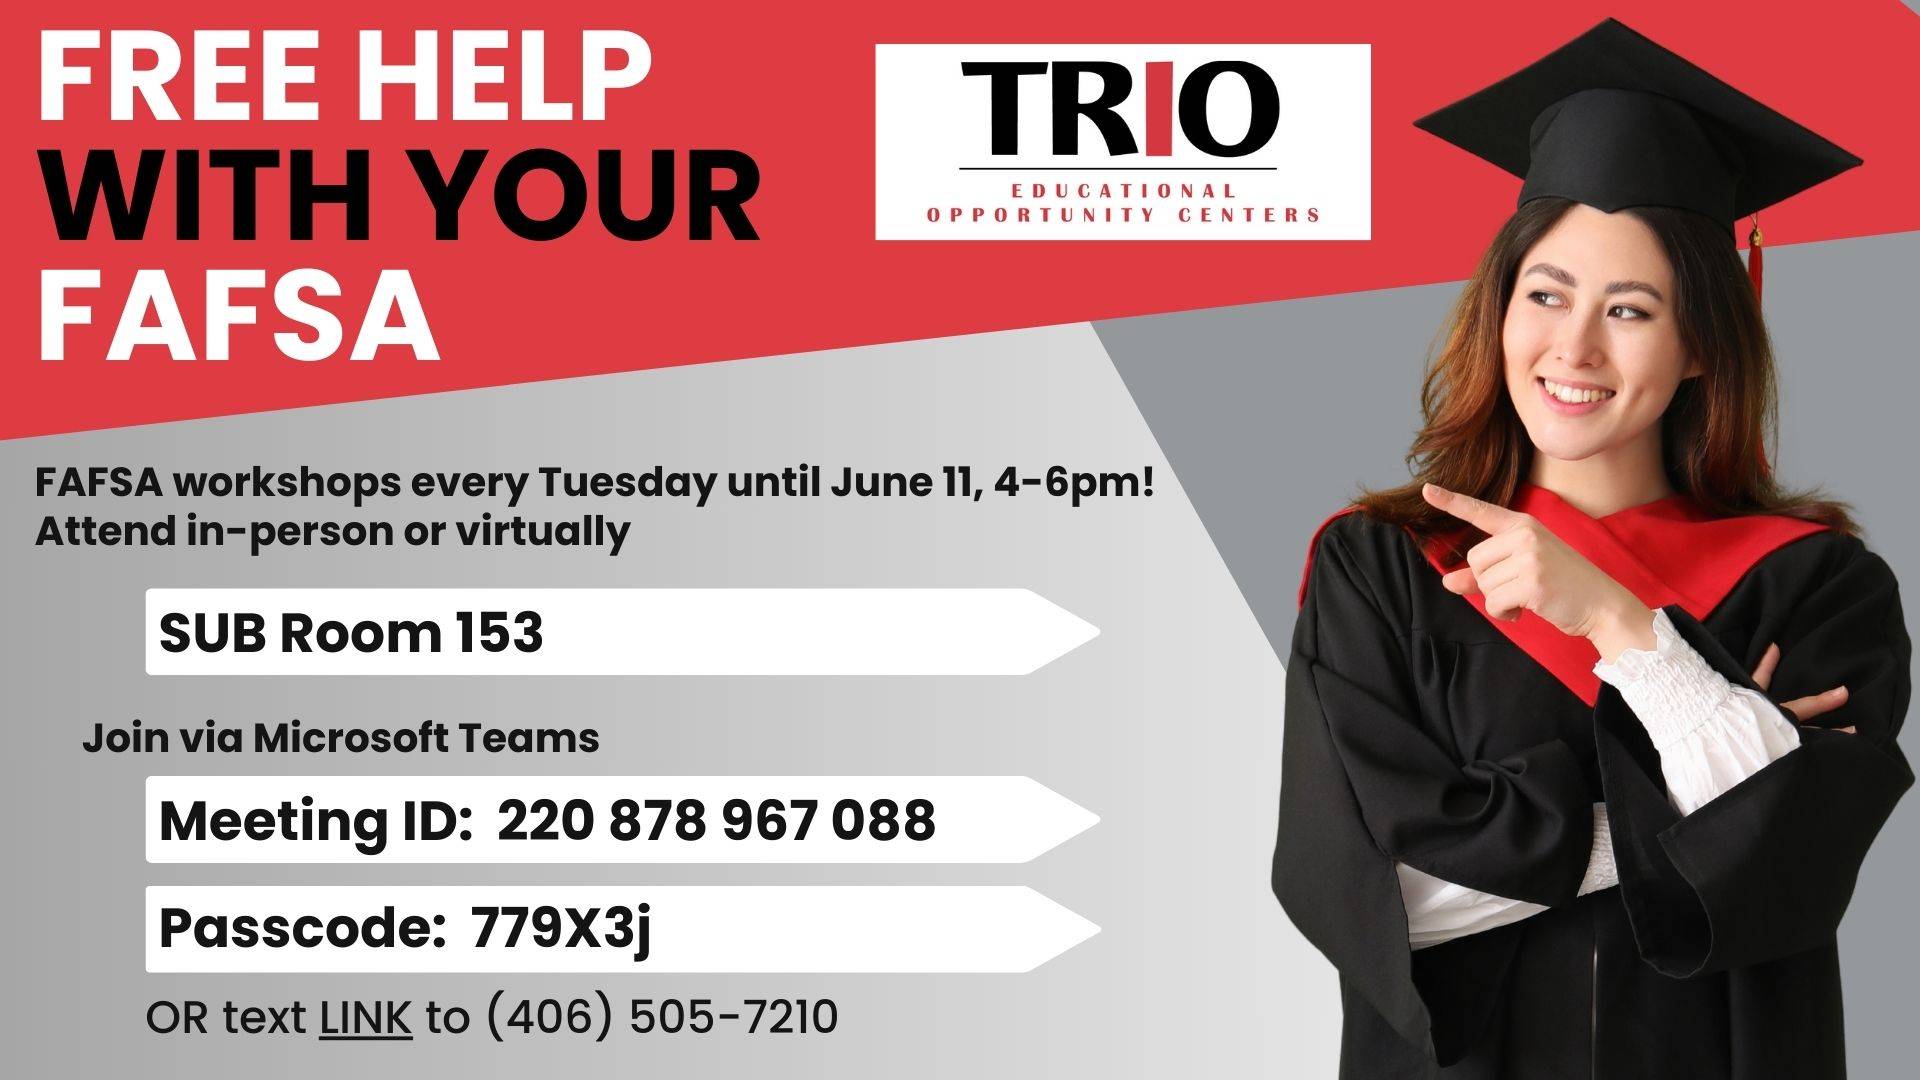 FREE help with your FAFSA. FAFSA workshops every Tuesday until June 11, from 4-6! Attend in-person or virtually. Visit SUB Room 153 or join via Microsoft Teams Meeting ID:  220 878 967 088 Passcode:  779X3j OR text LINK to (406) 505-7210 